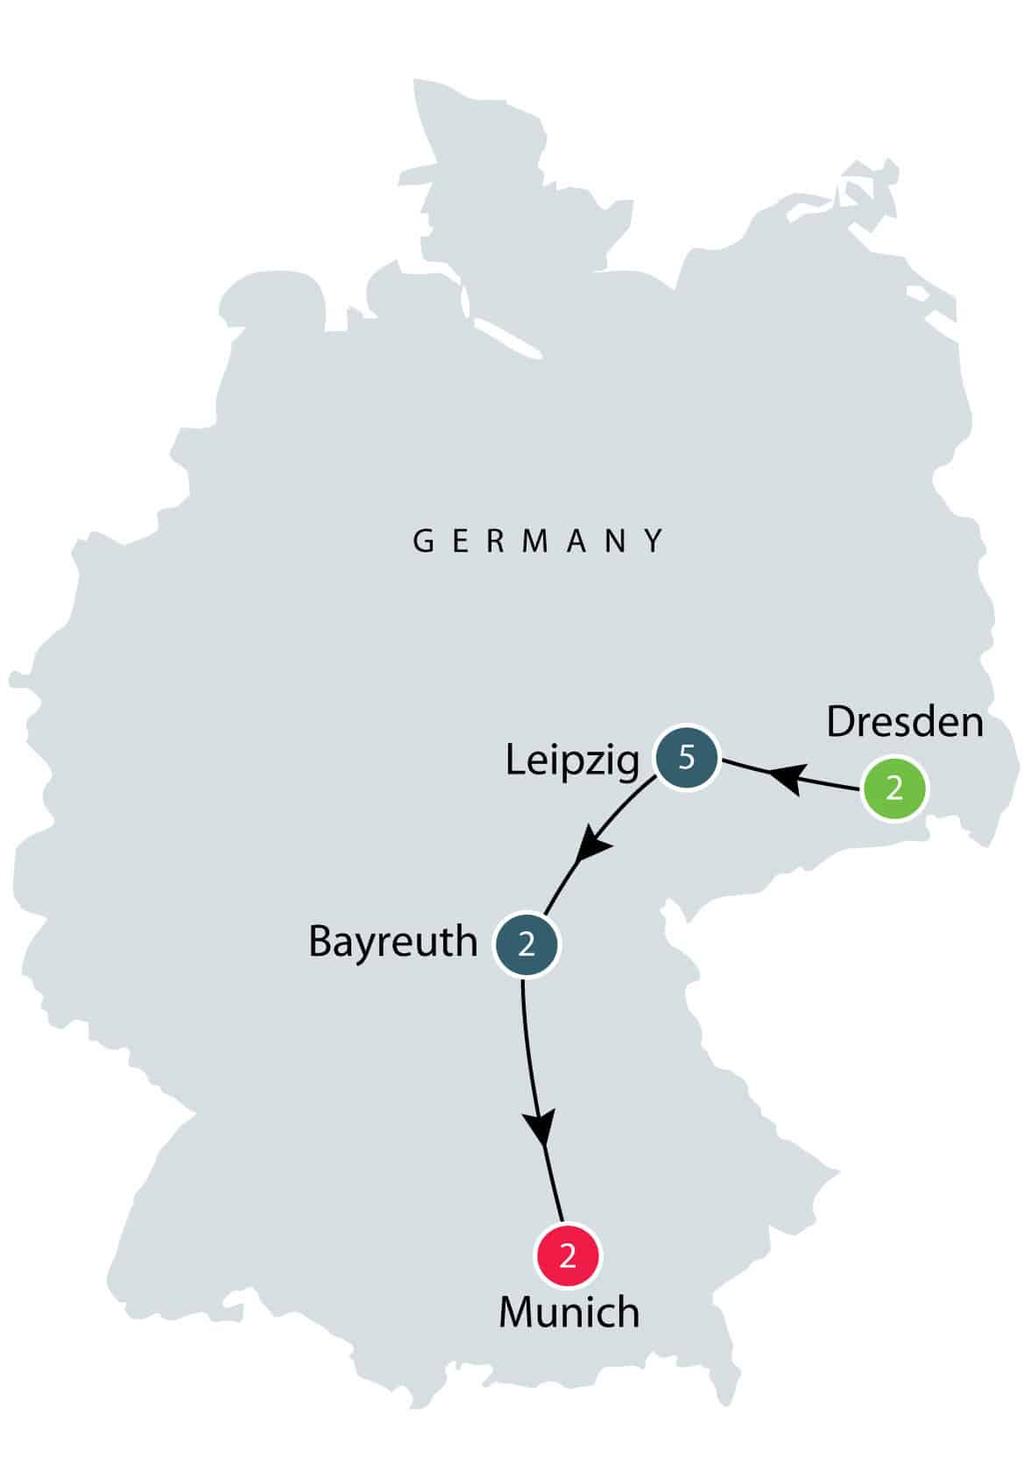 From $8,395 NZD Single $9,445 NZD Twin share $8,395 NZD 12 days Duration Europe Destination Level 2 - Moderate Activity Richard Wagner Ring cycle small group tour Leipzig 29 Apr 19 to 10 May 19